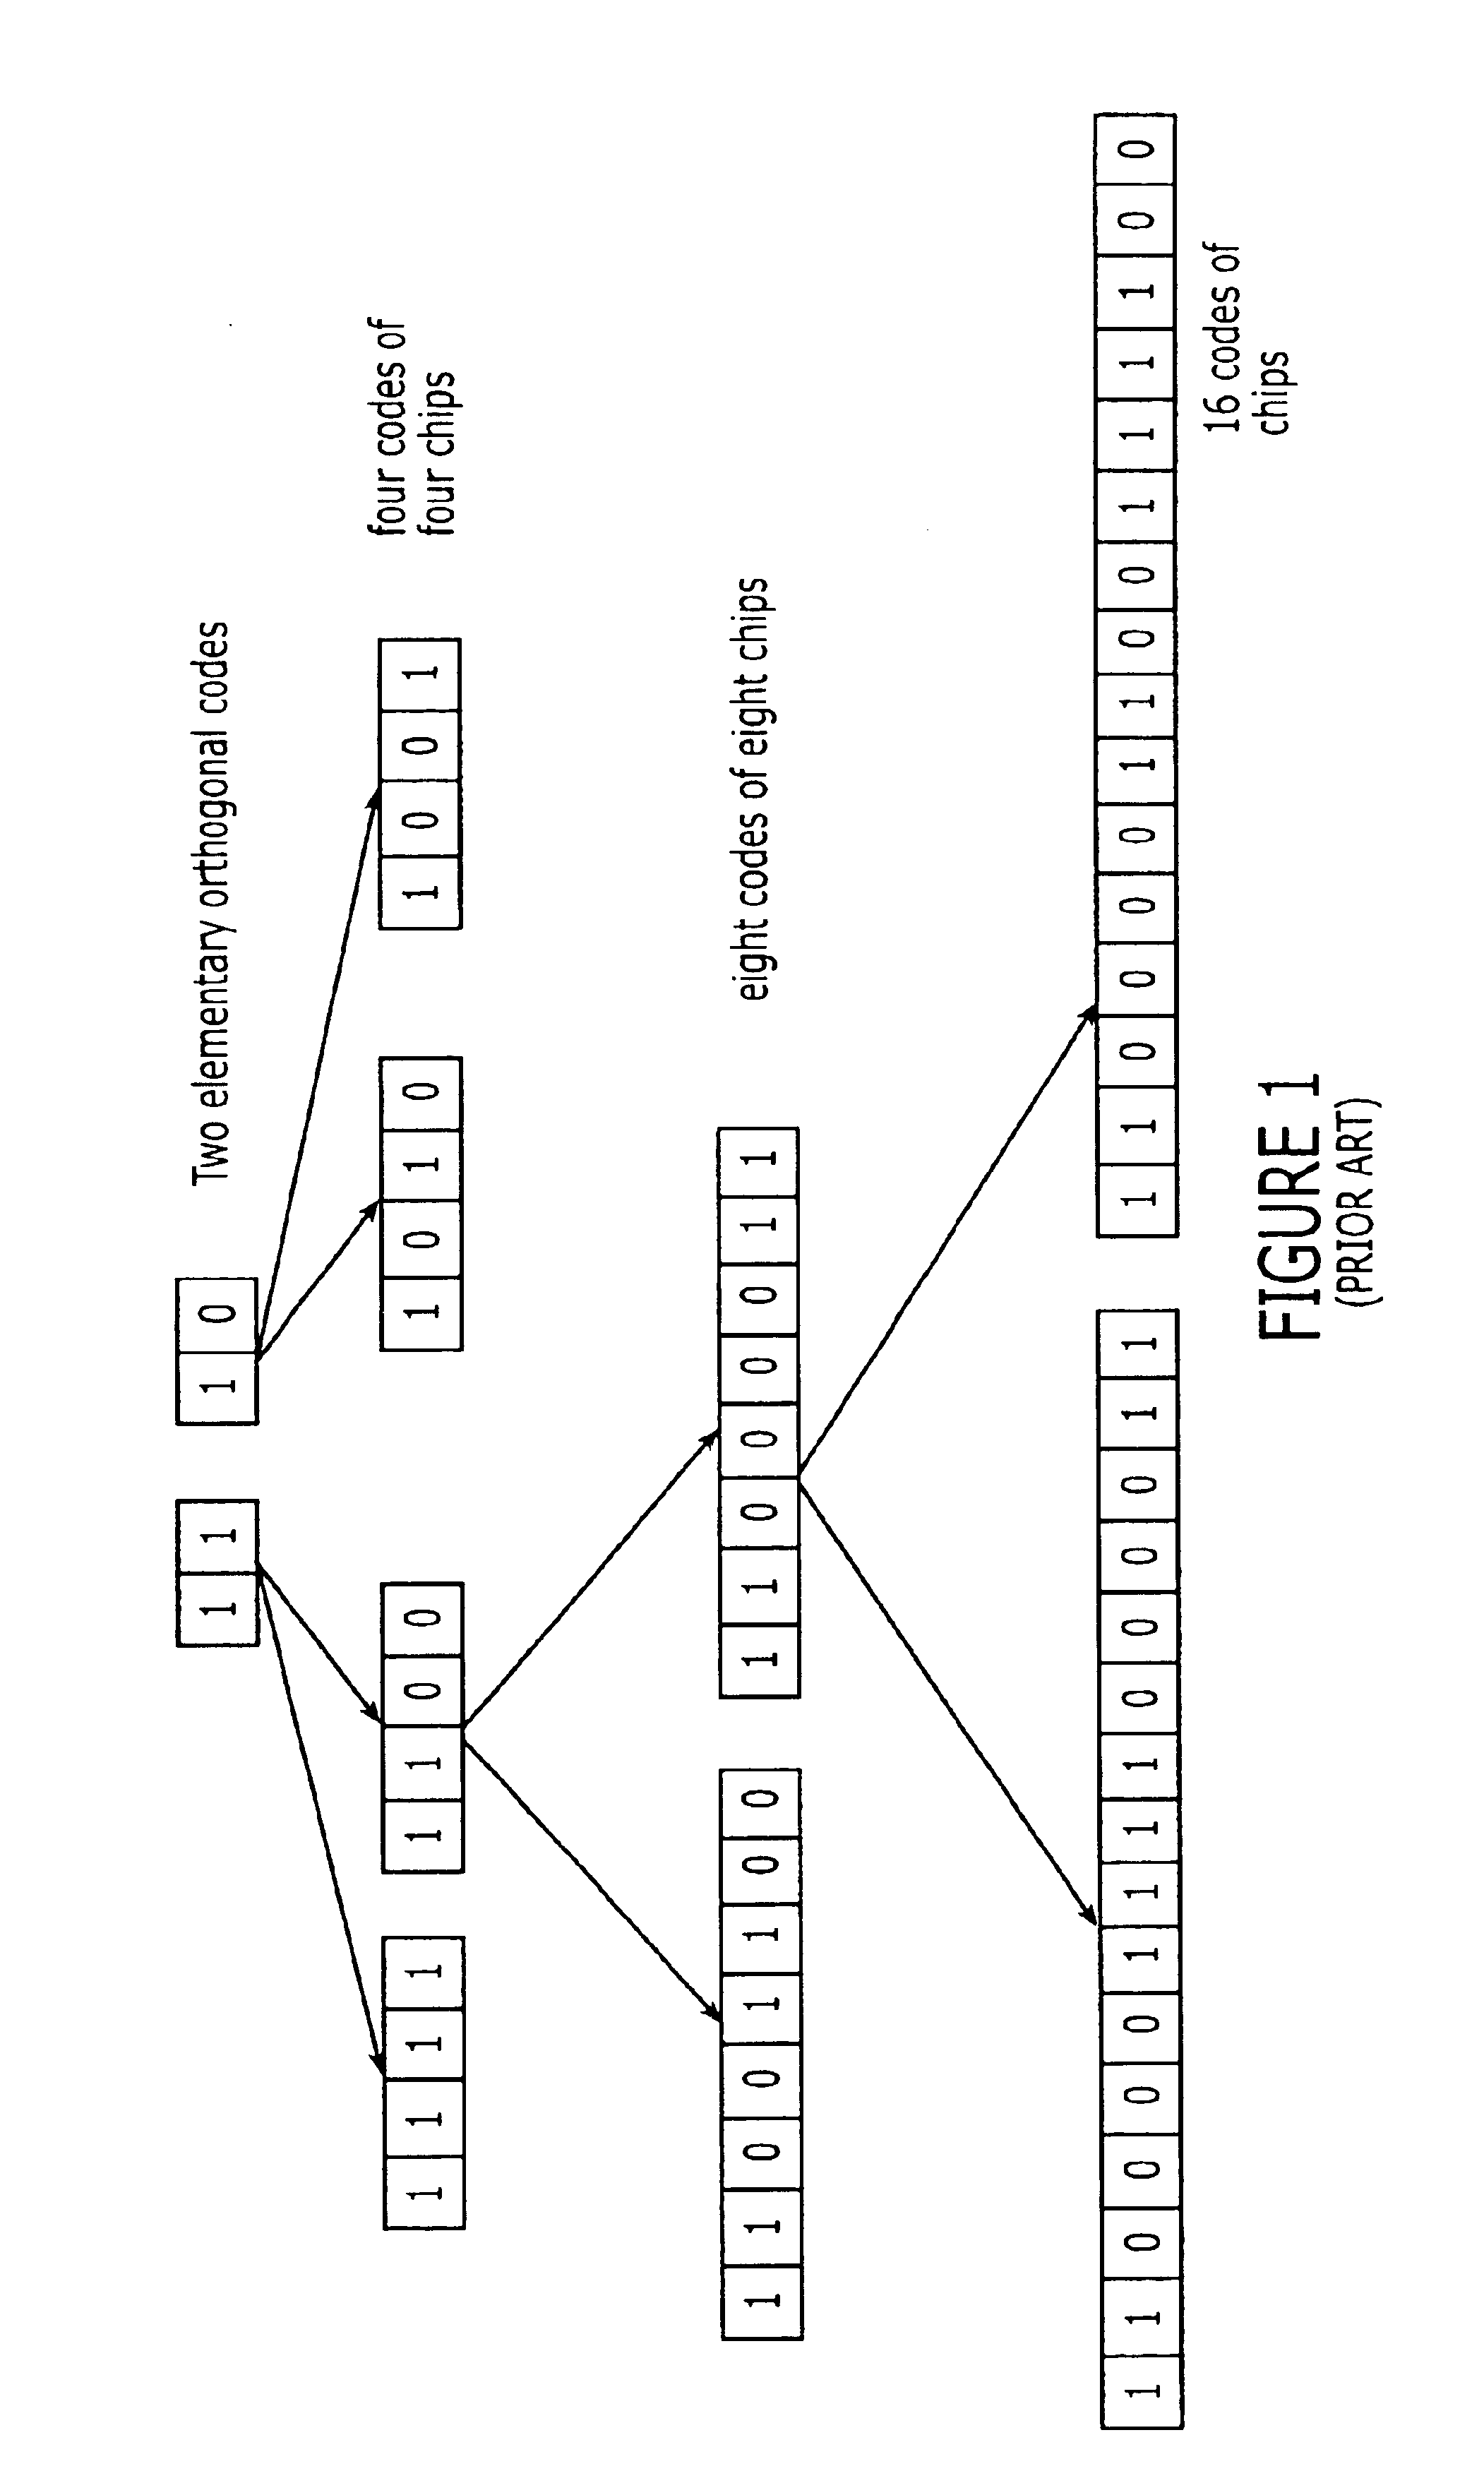 Systems and methods for communicating spread spectrum signals using variable signal constellations